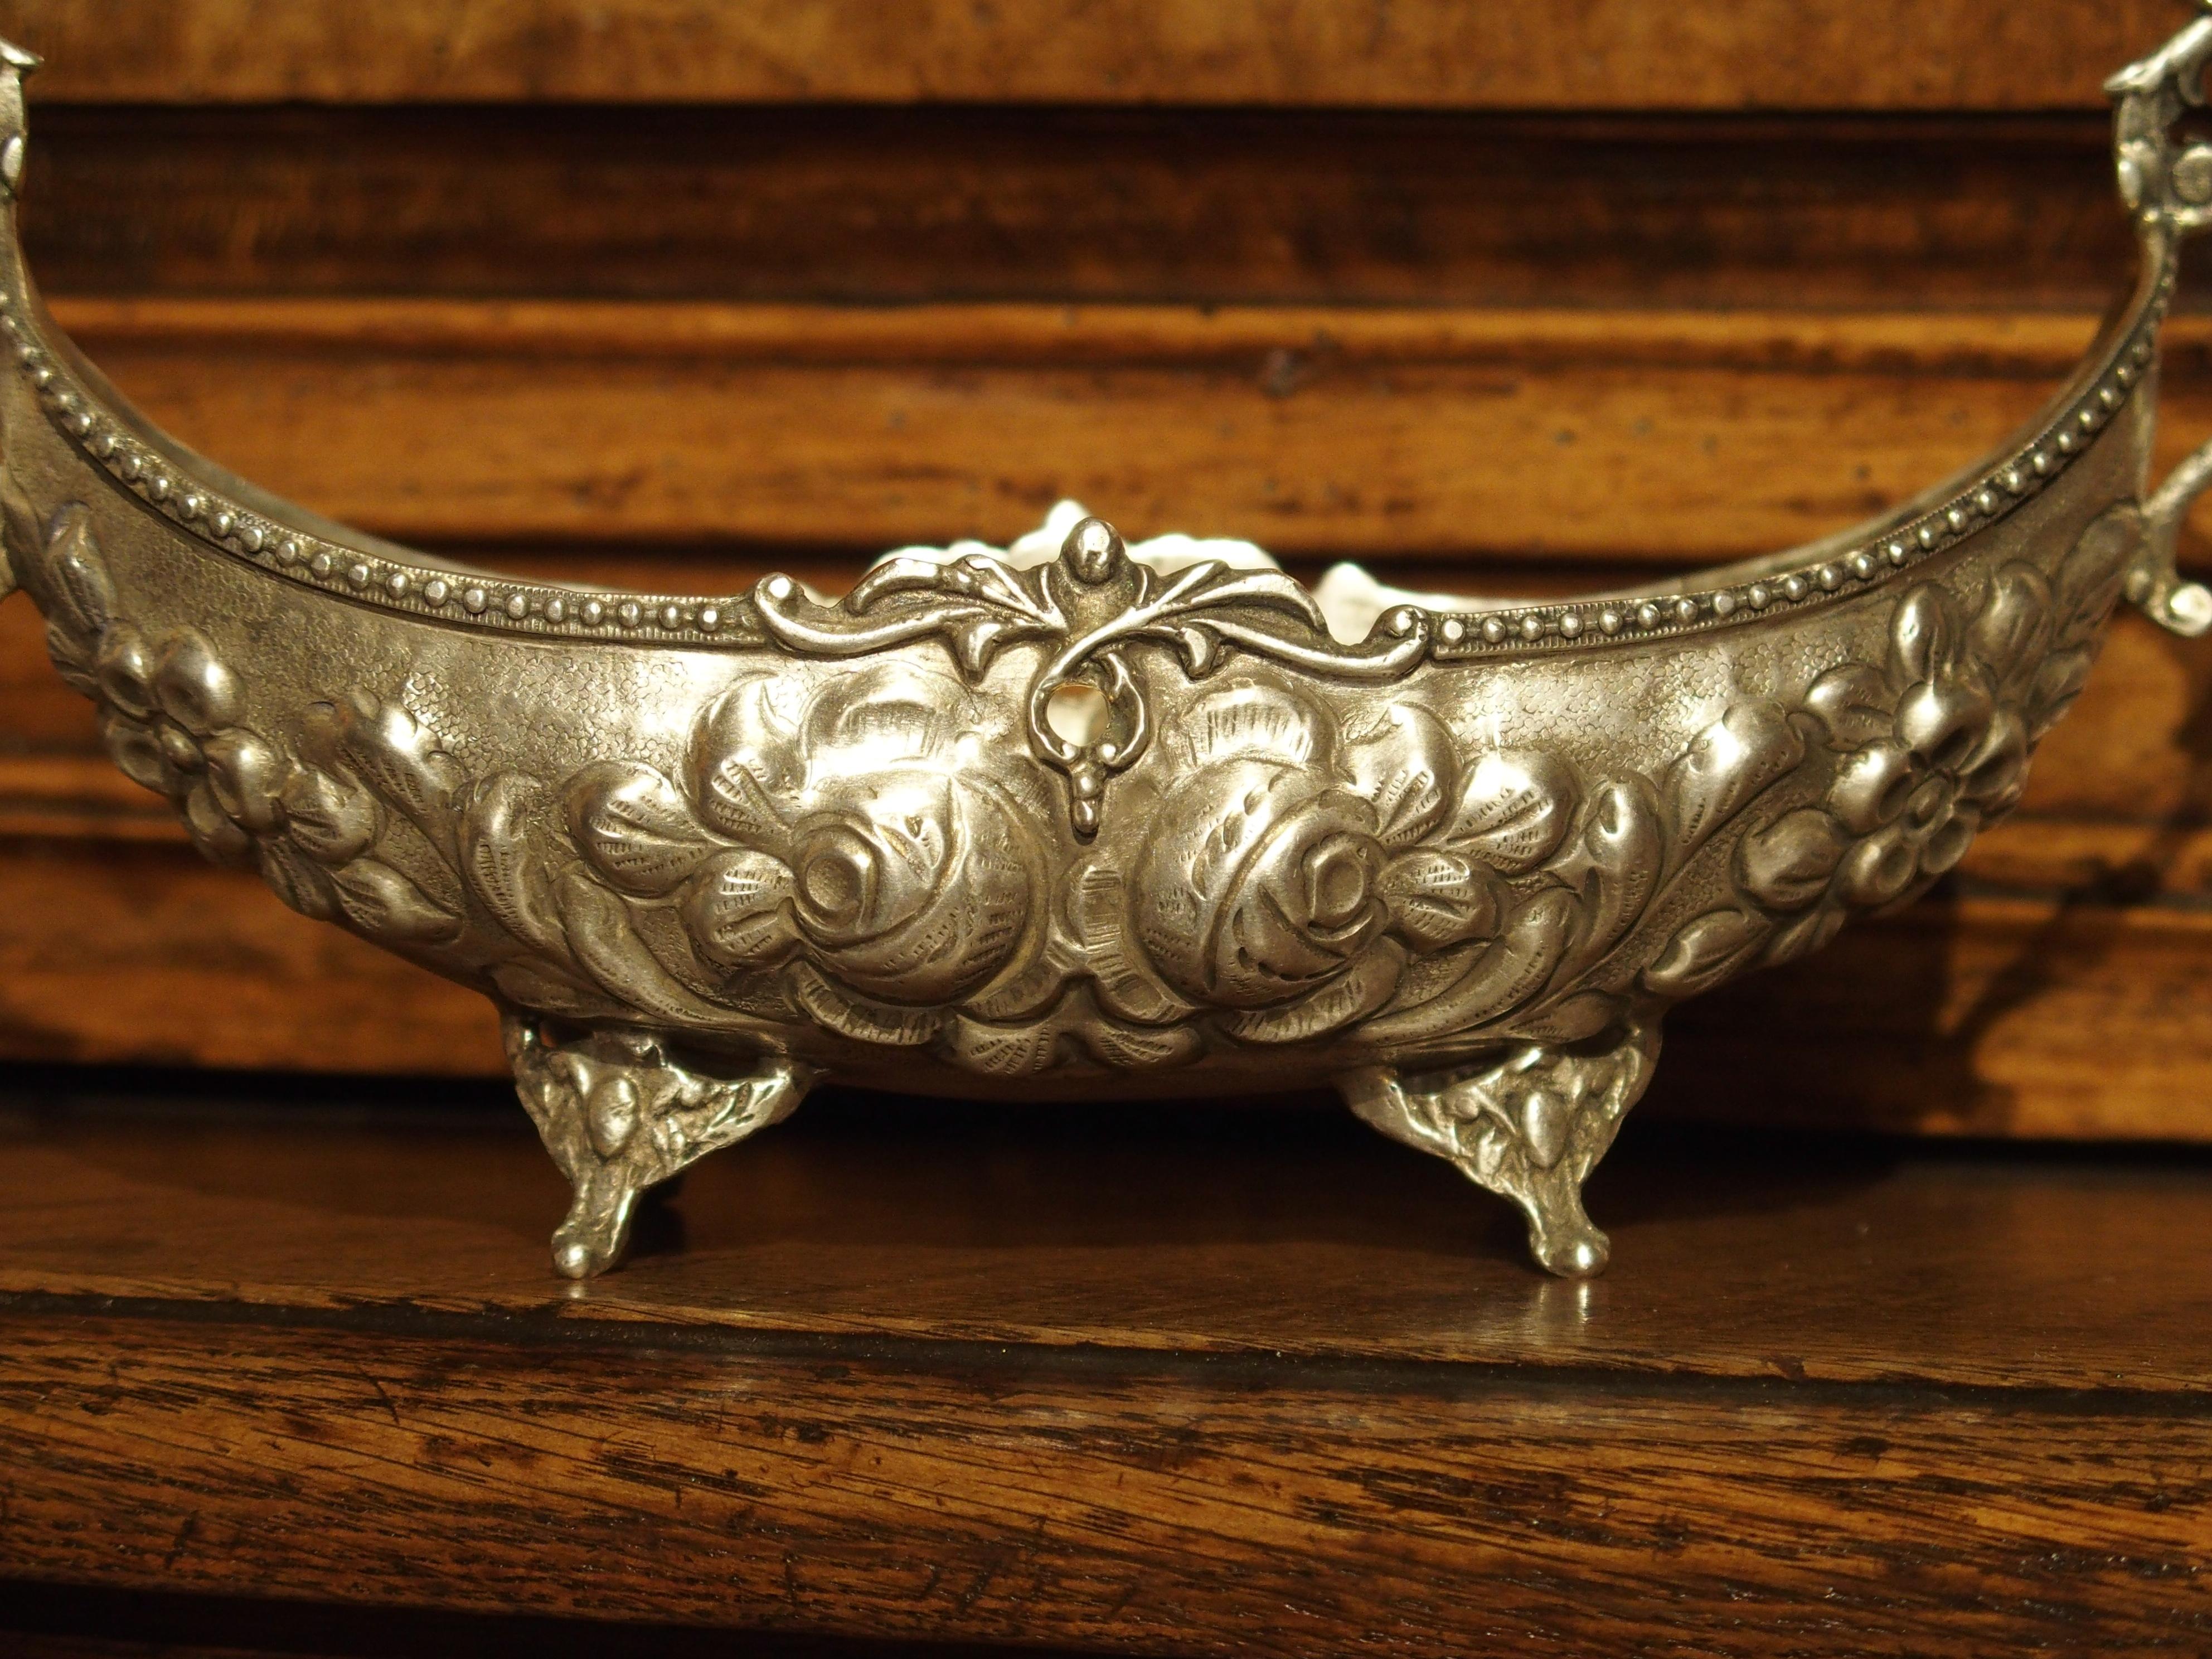 Small Antique Silver Gondola Form Serving Bowl from Germany, circa 1900 3